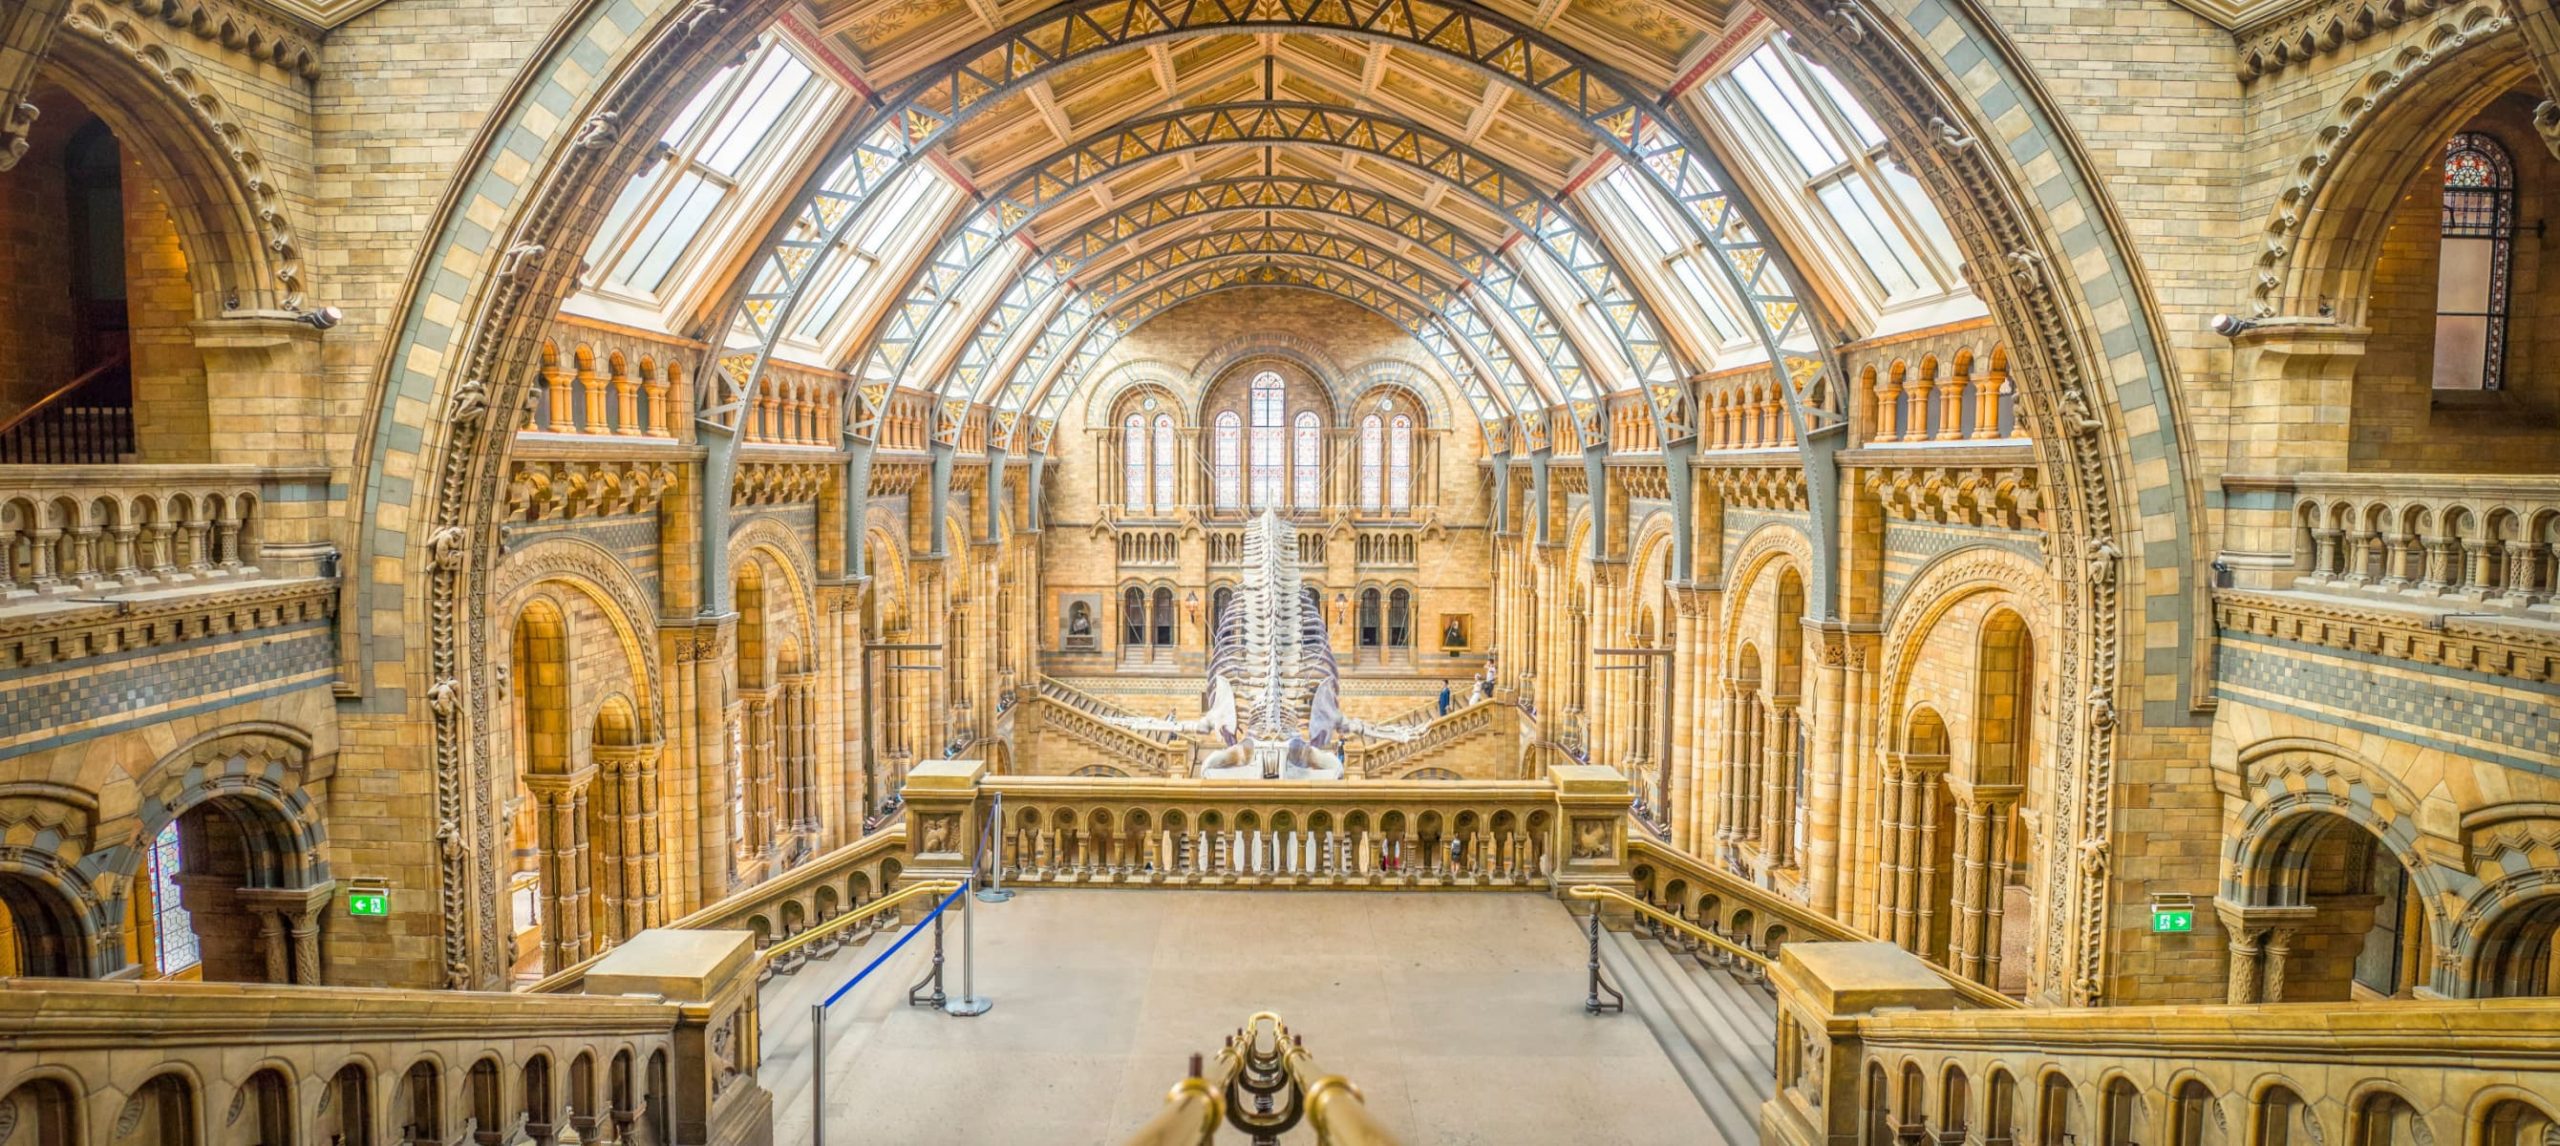 Image of the dinosaur at the Natural History Museum in London.